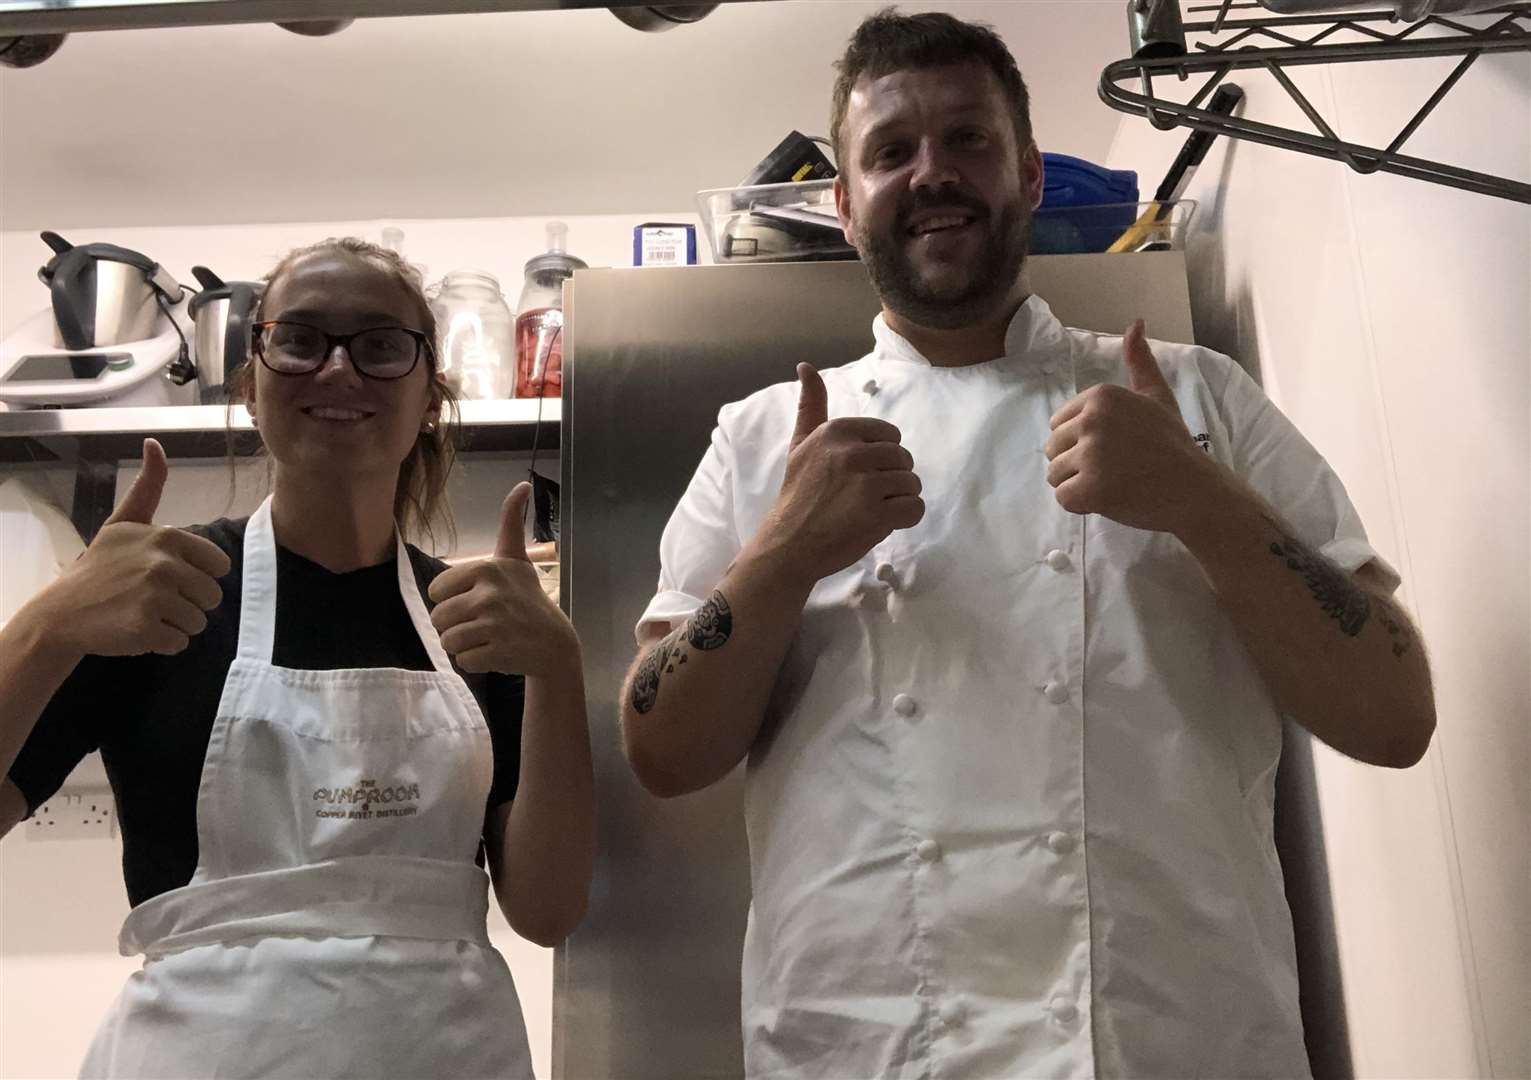 Will (right) gave my attempt a double thumbs-up but said presentation needs work